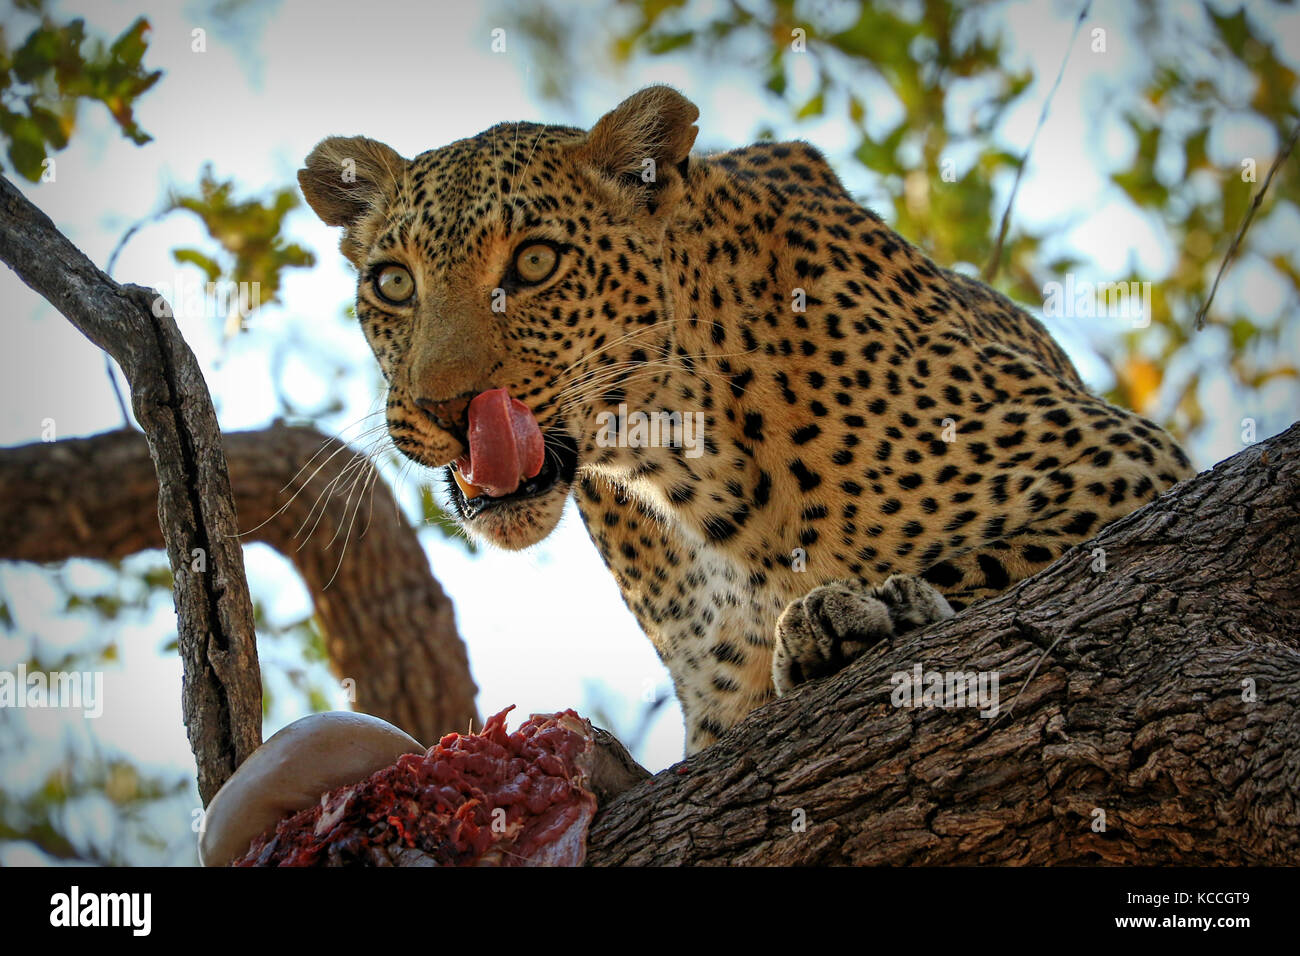 A leopard eating an antelope on a tree, Kruger National Park, South Africa Stock Photo